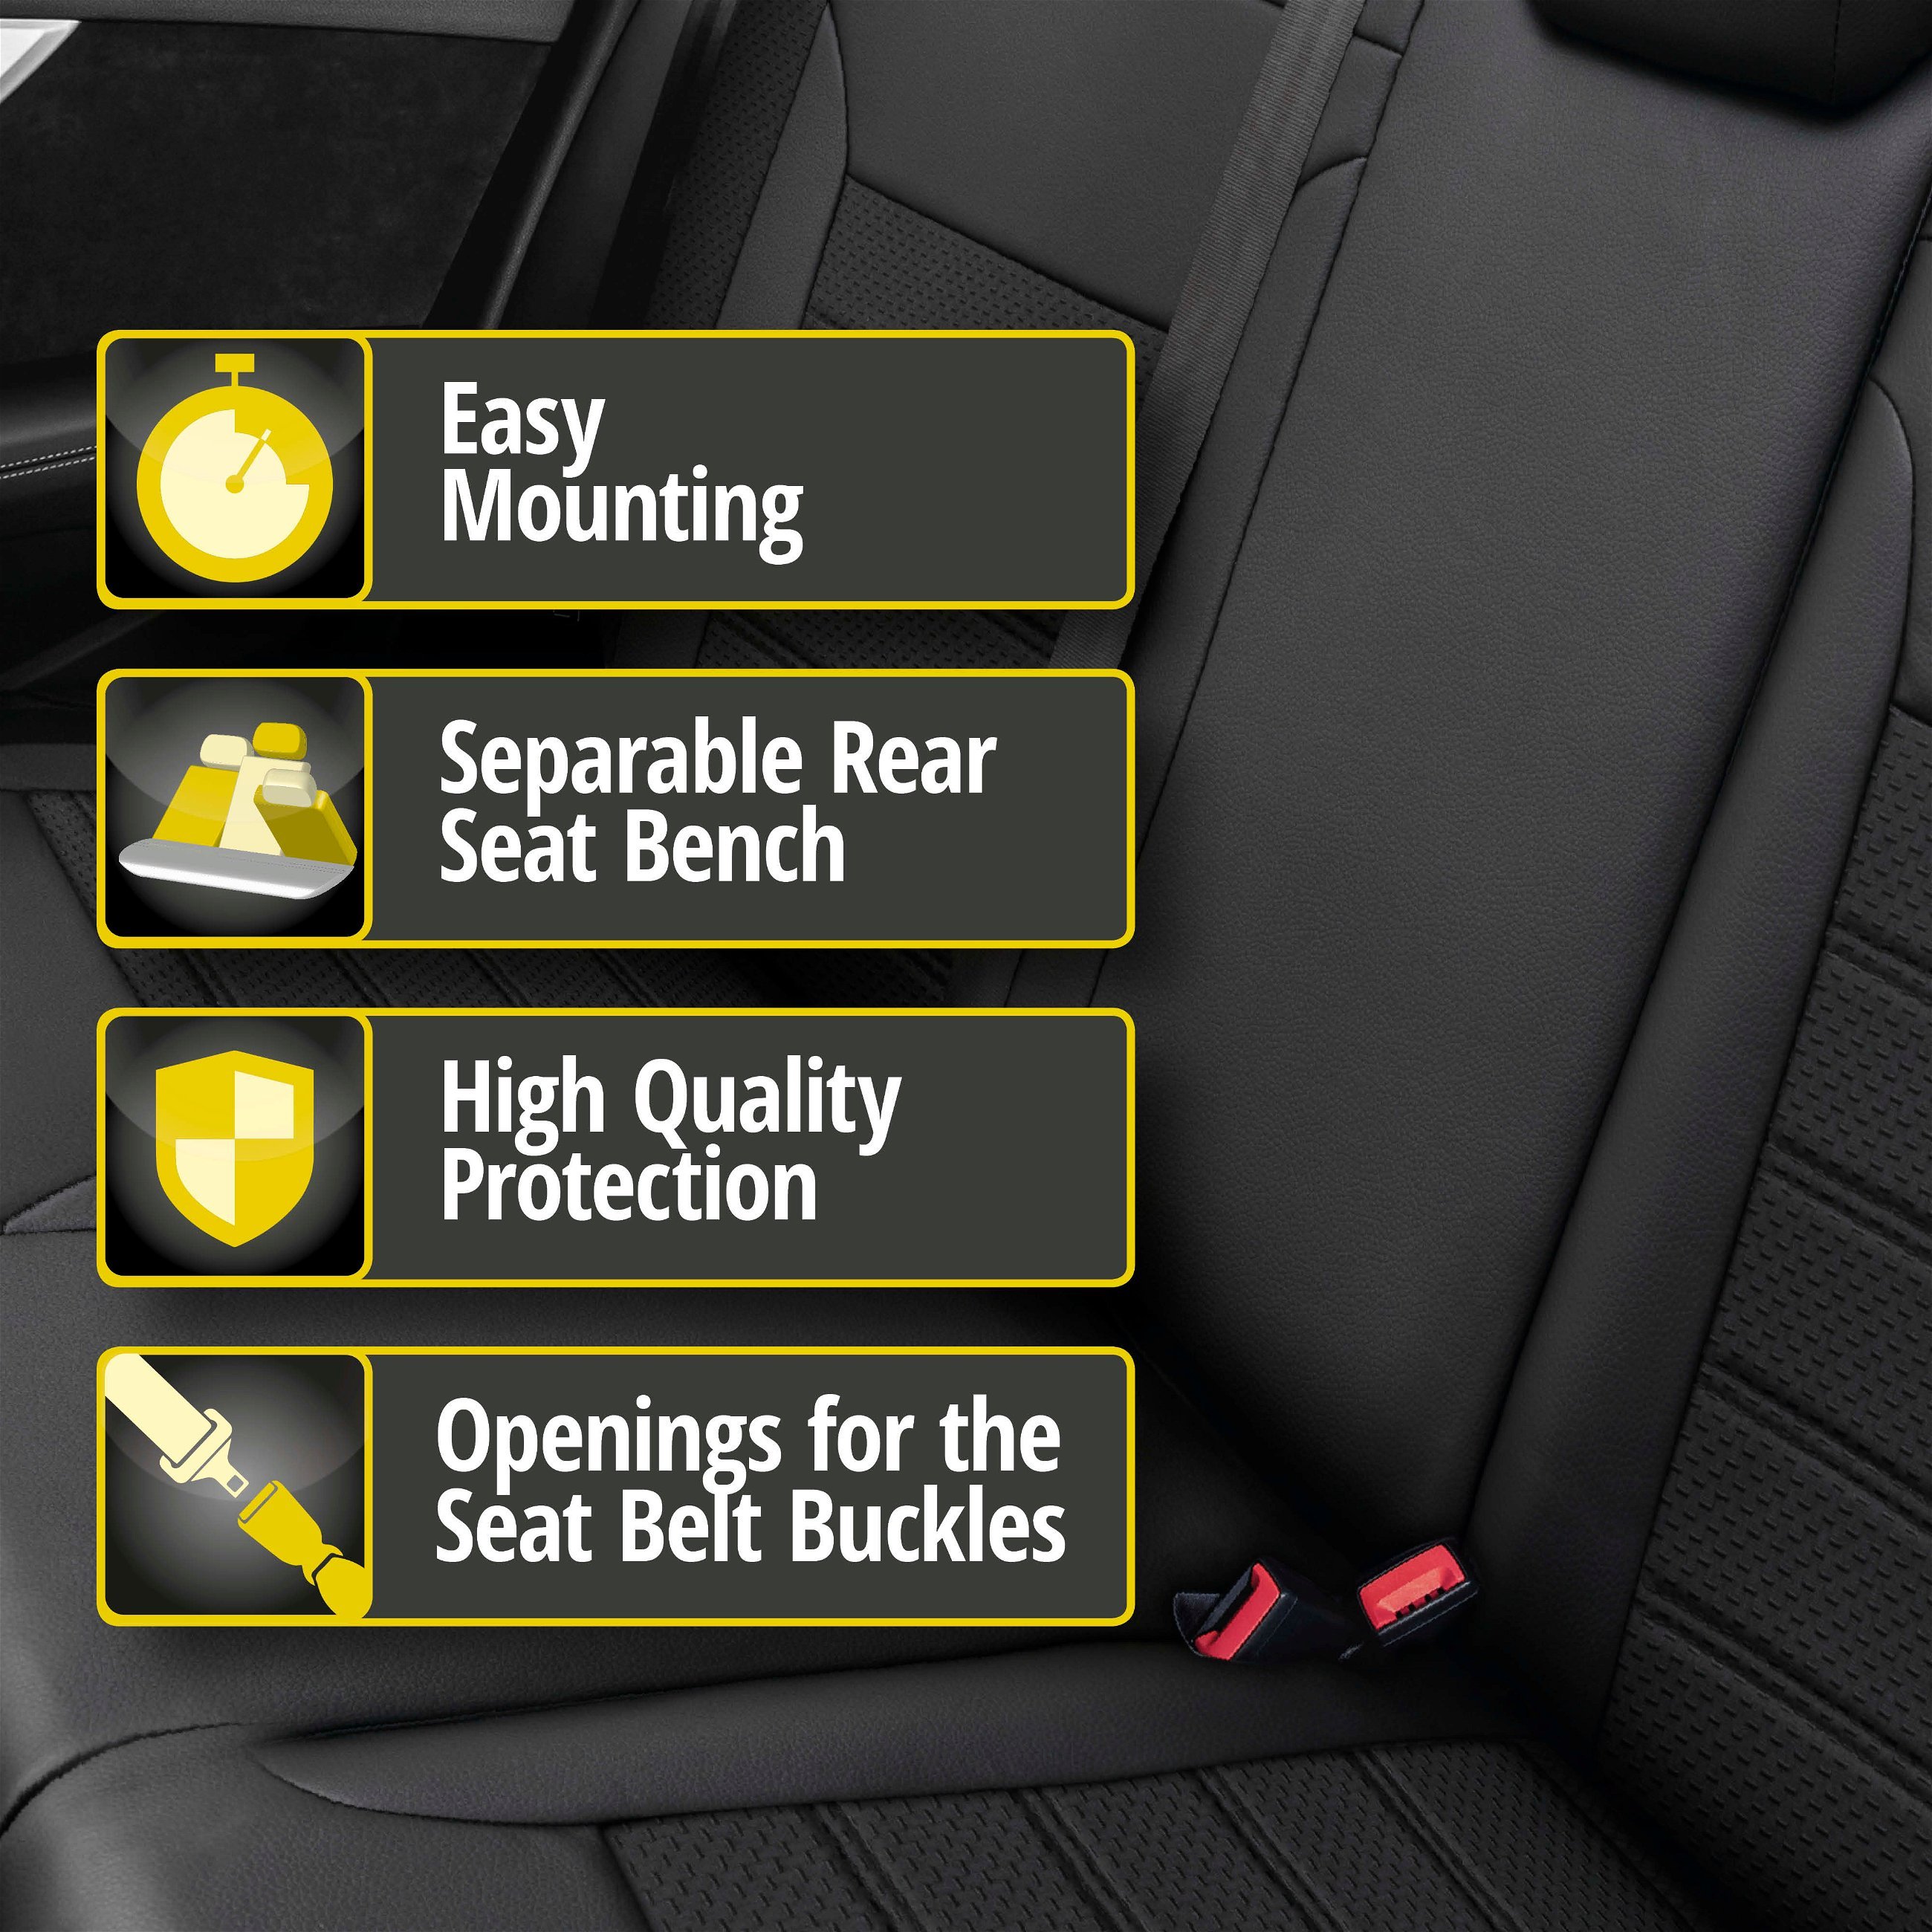 Seat cover Expedit for Ford Fiesta 2017-Today, 1 rear seat cover for normal seats